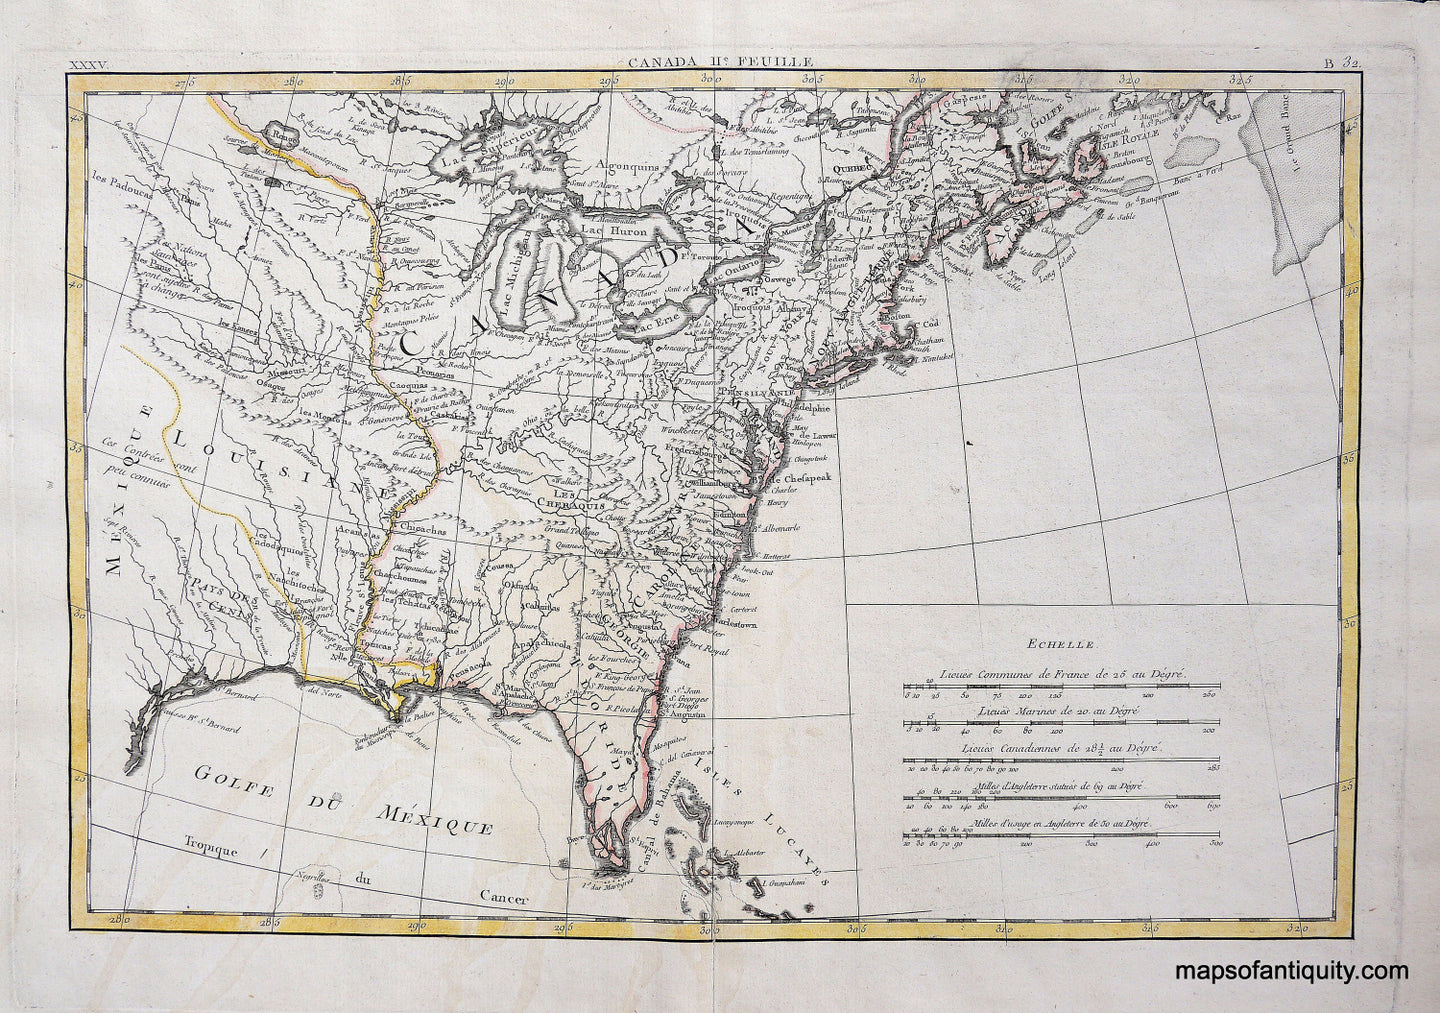 Antique-Hand-Colored-Map-Canada-Sheet-**********-North-America-North-America-General-1785-Bonne-Maps-Of-Antiquity